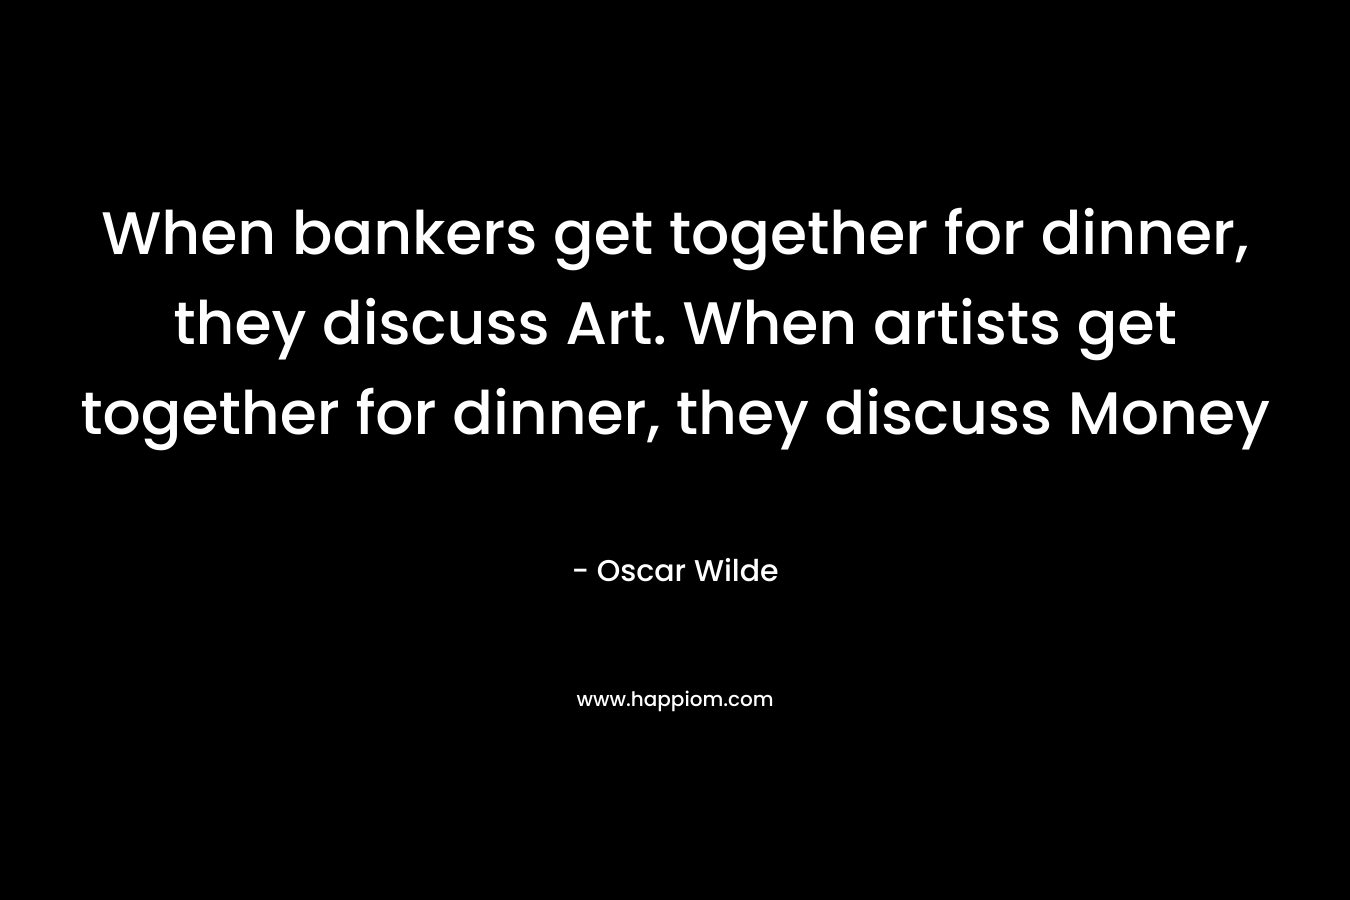 When bankers get together for dinner, they discuss Art. When artists get together for dinner, they discuss Money – Oscar Wilde